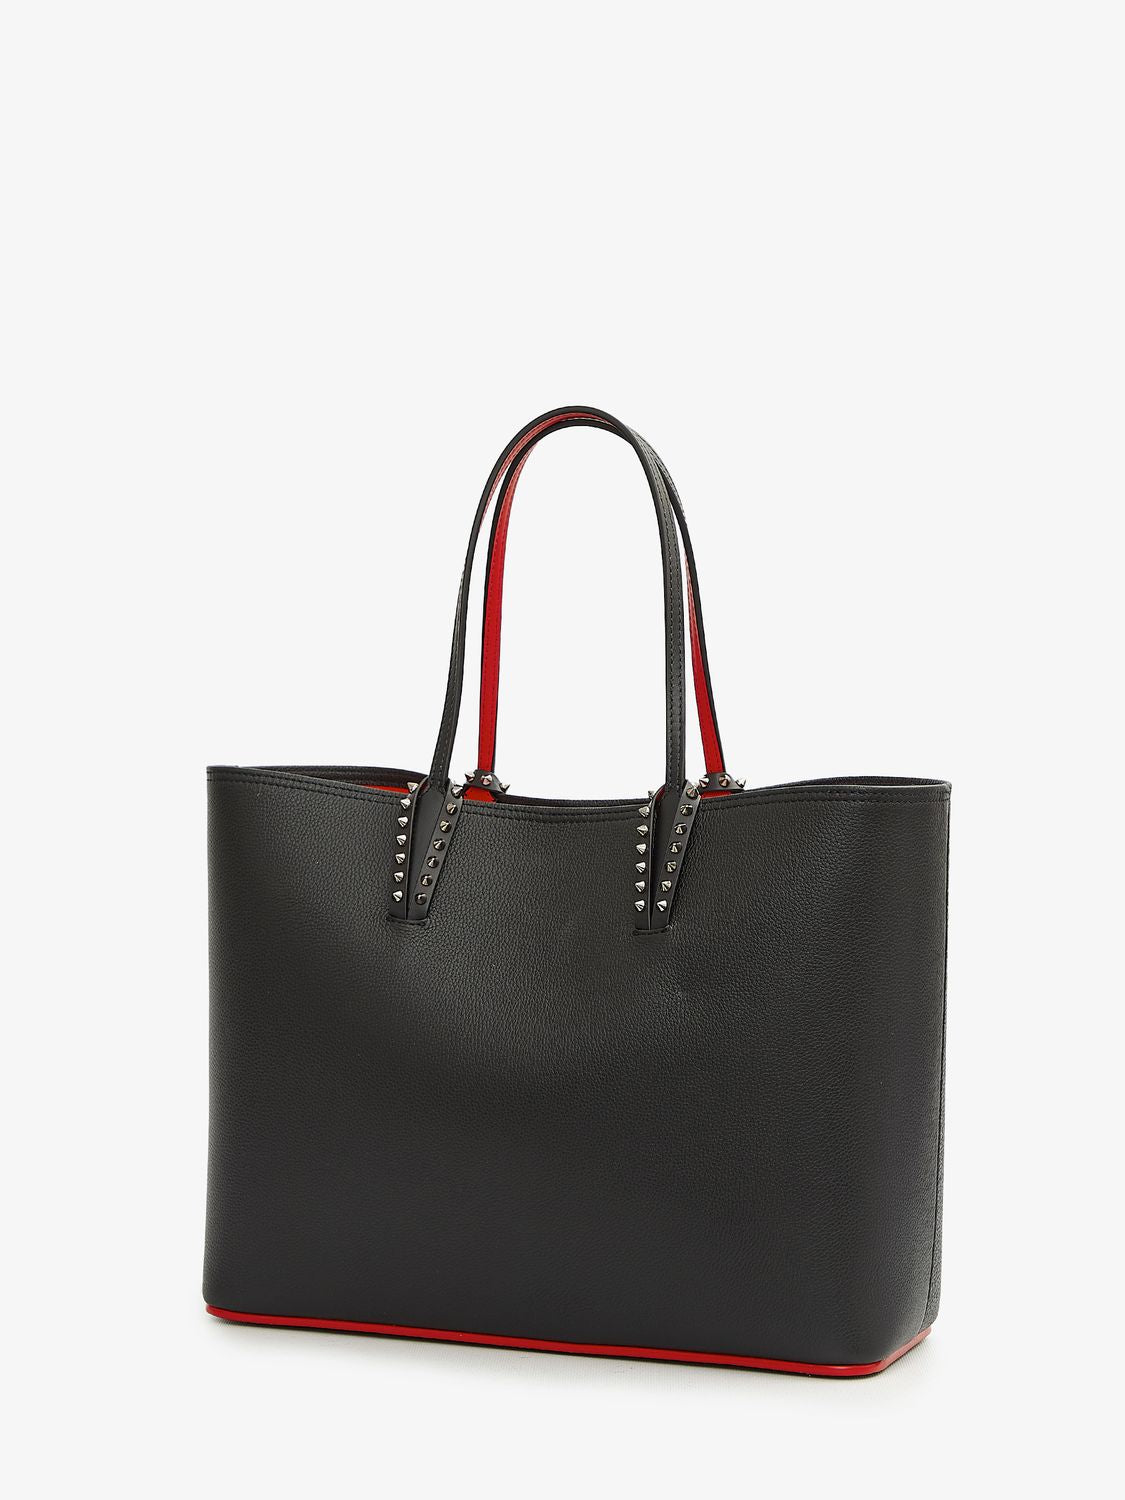 CHRISTIAN LOUBOUTIN Sophisticated and Versatile Tote Handbag for Women